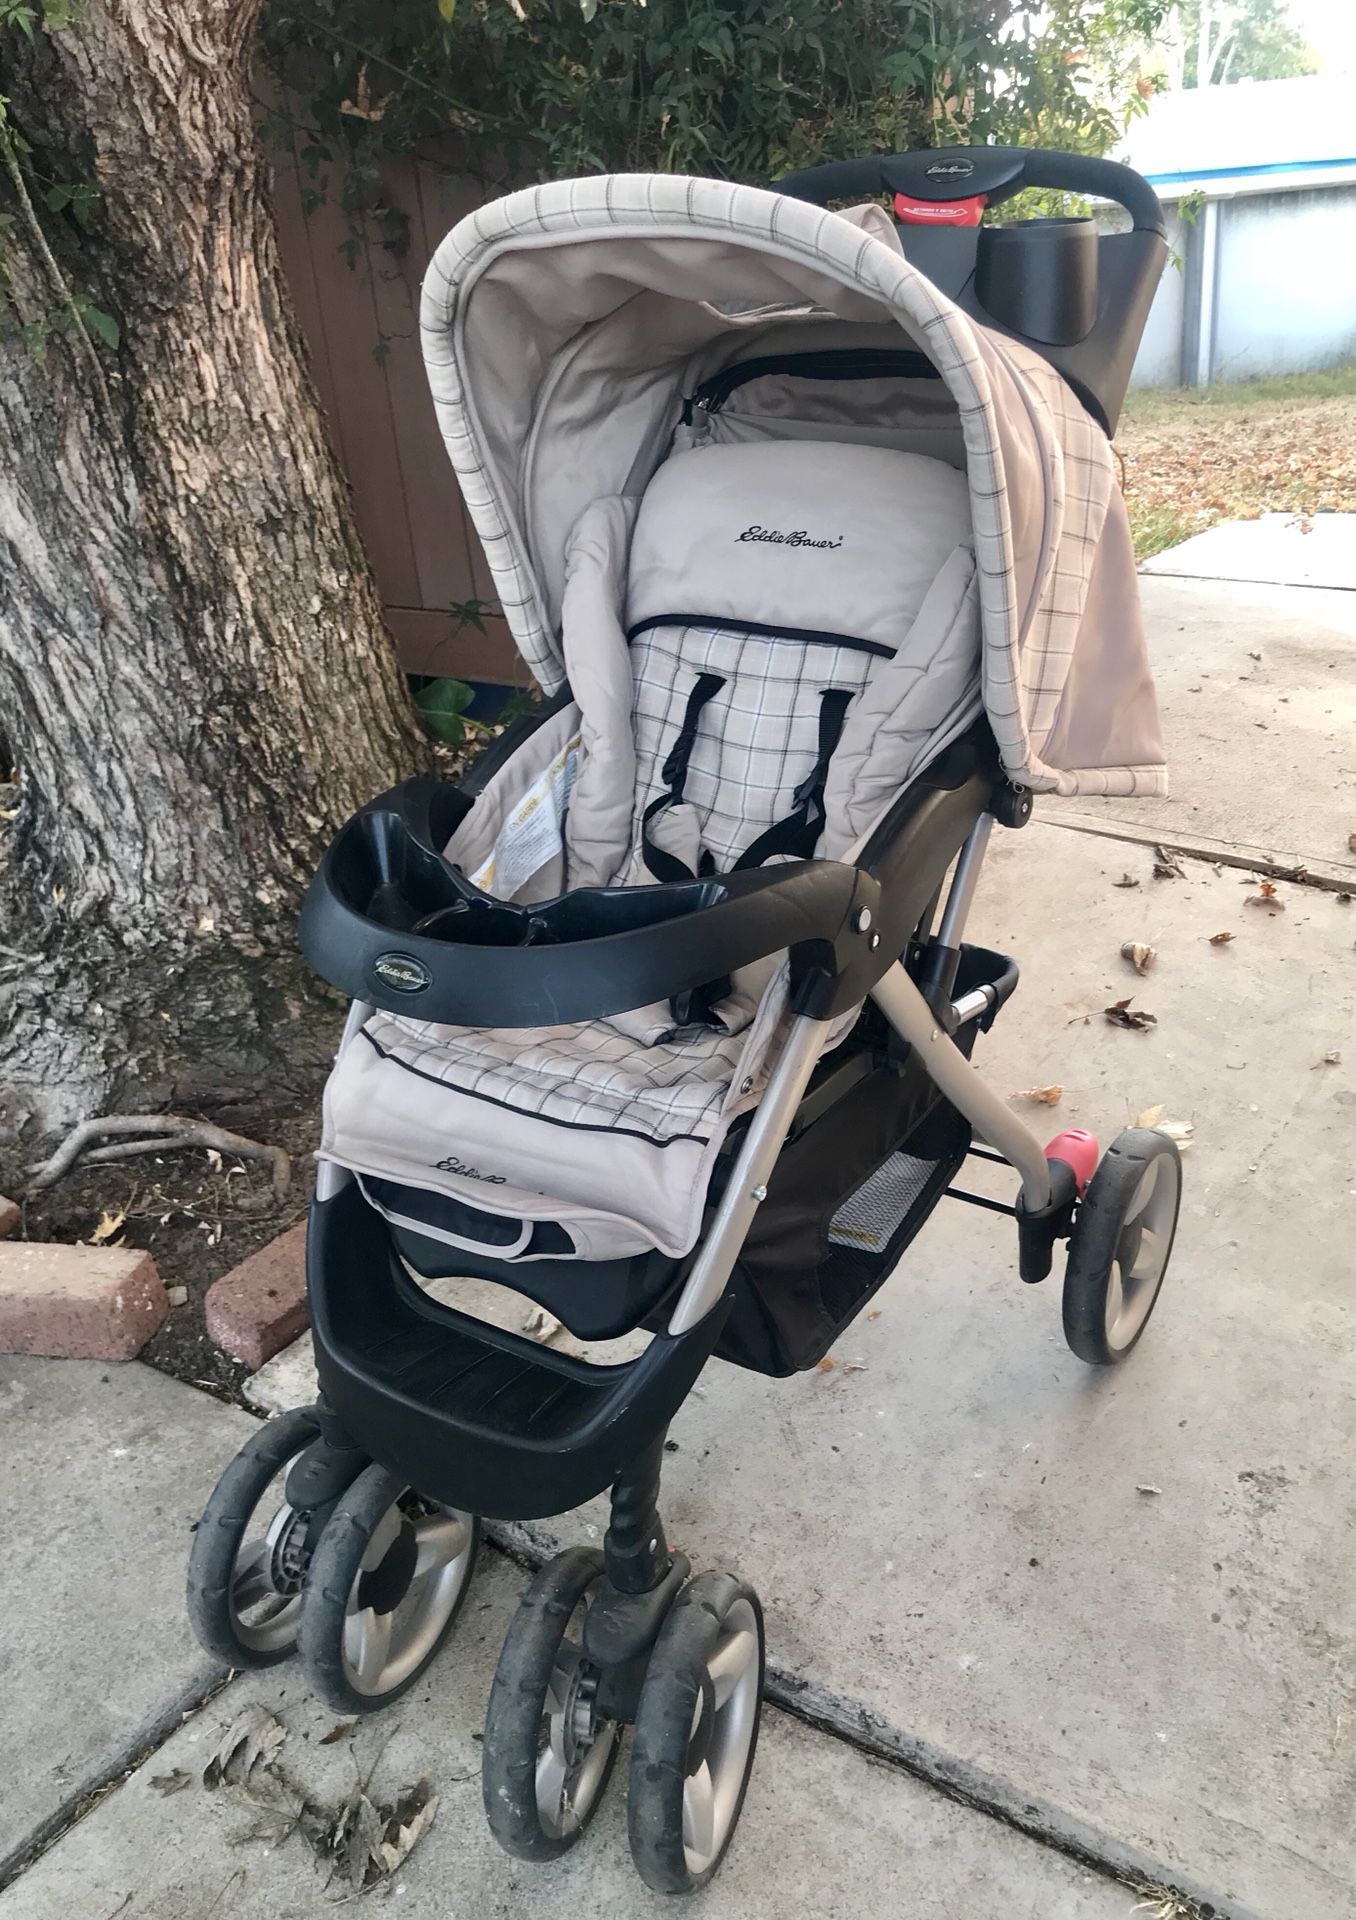 Stroller - Eddie Bauer, cup holder, Phone compartment/ storage space, easy collapsible, top viewer, bottom storage, back storage, folds up with one b